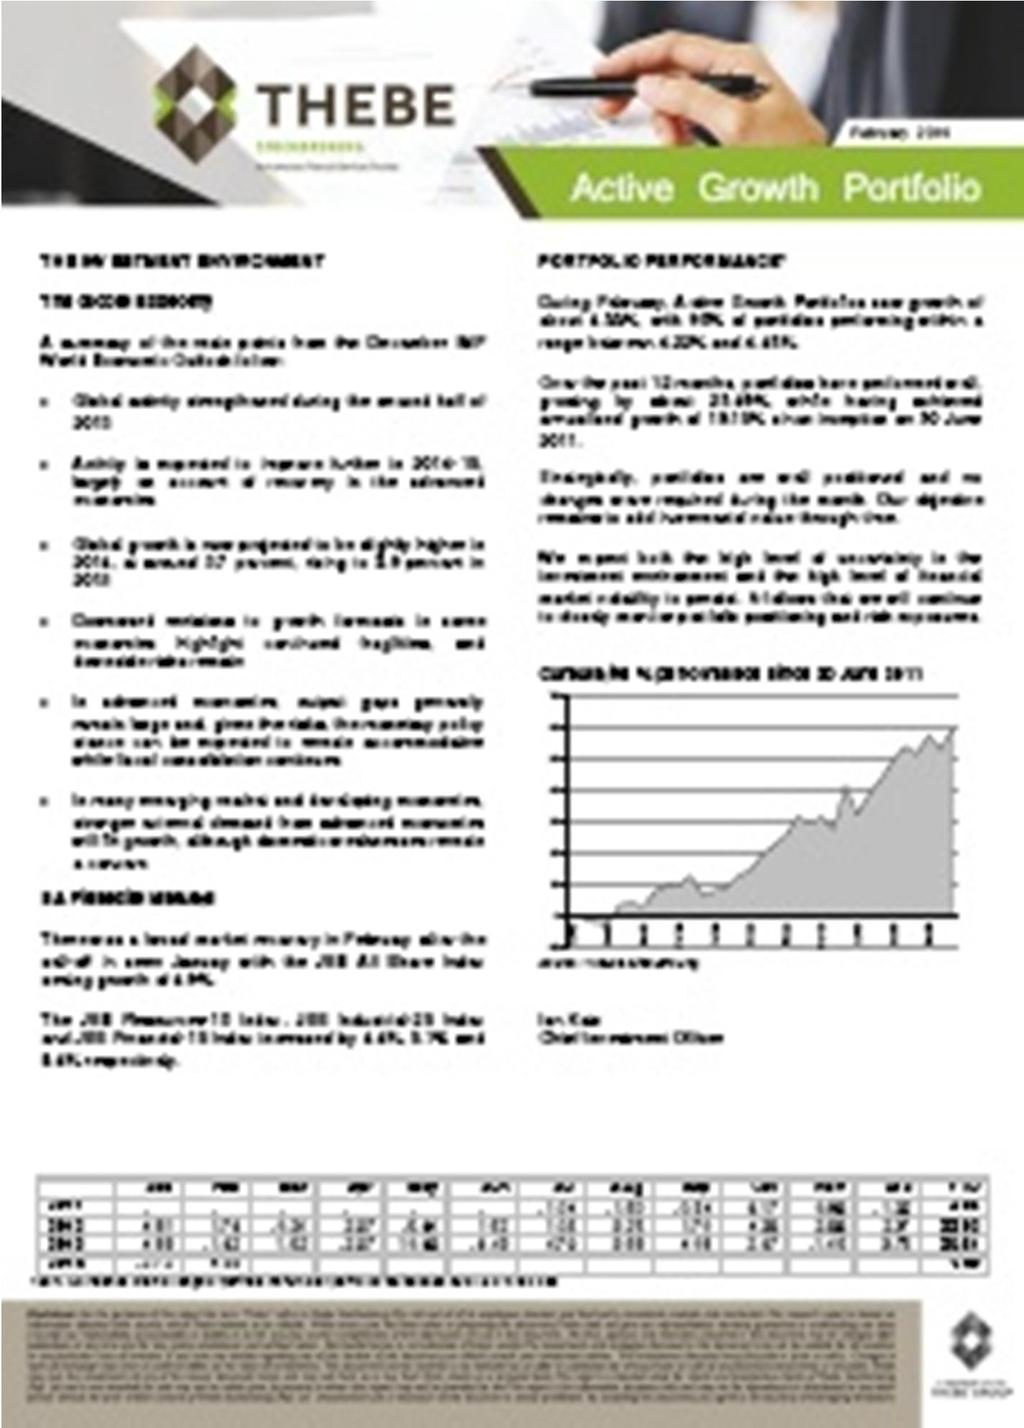 Stock Select Monthly January 2017 Thebe Stockbroking Risk Profiled Portfolios High Yield Active Growth ynamic Core Contact Thebe Stockbroking Tel: +27 11 375 1000 Email: info@thebestockbroking.co.